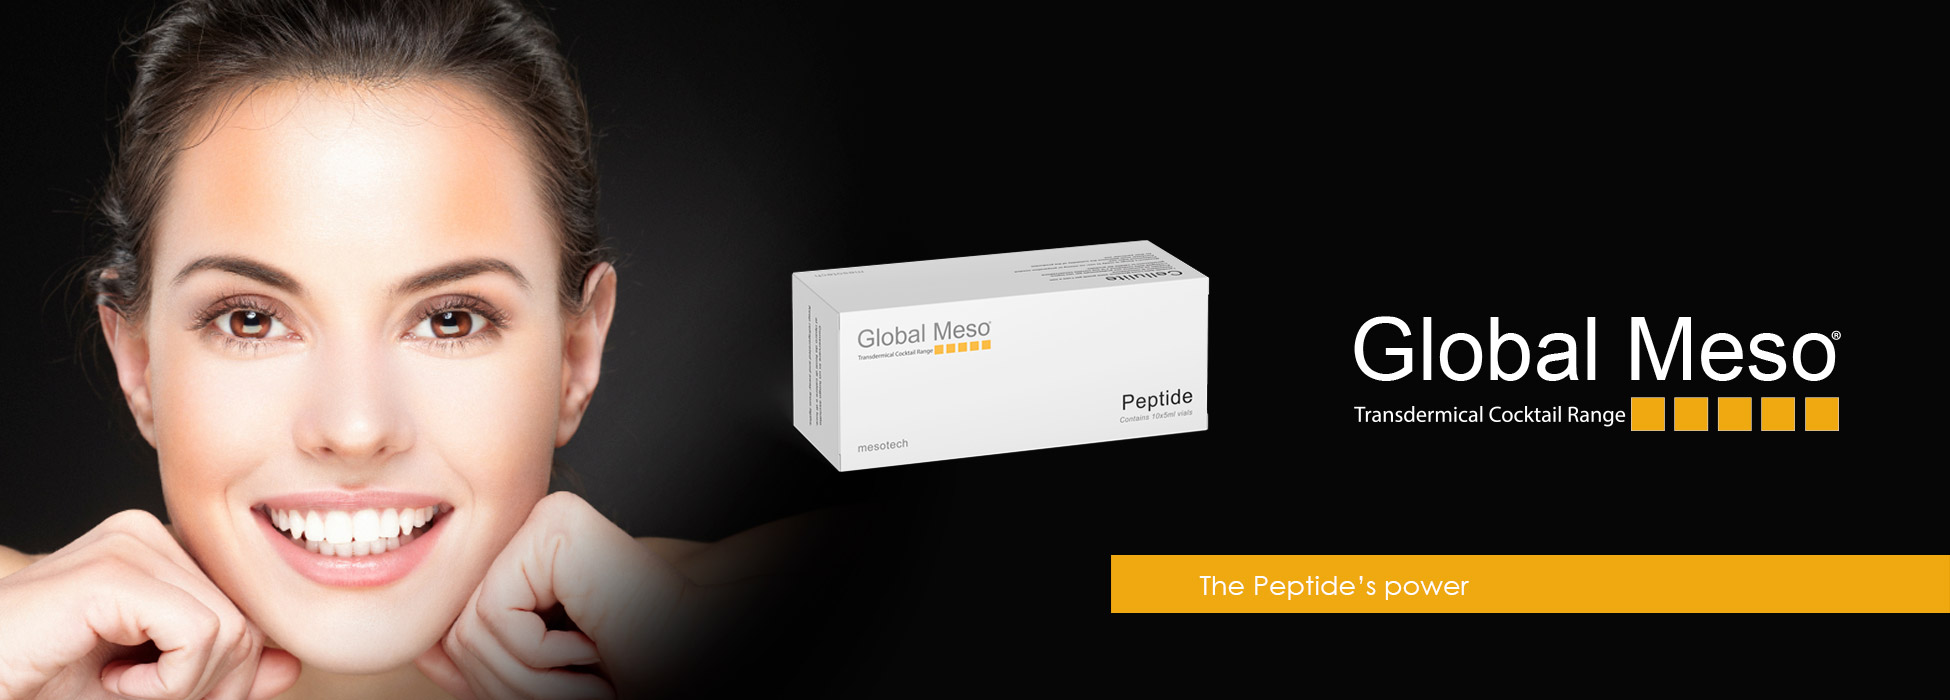 Global Meso Peptide - by Mesotech mesotherapy and cosmetics 